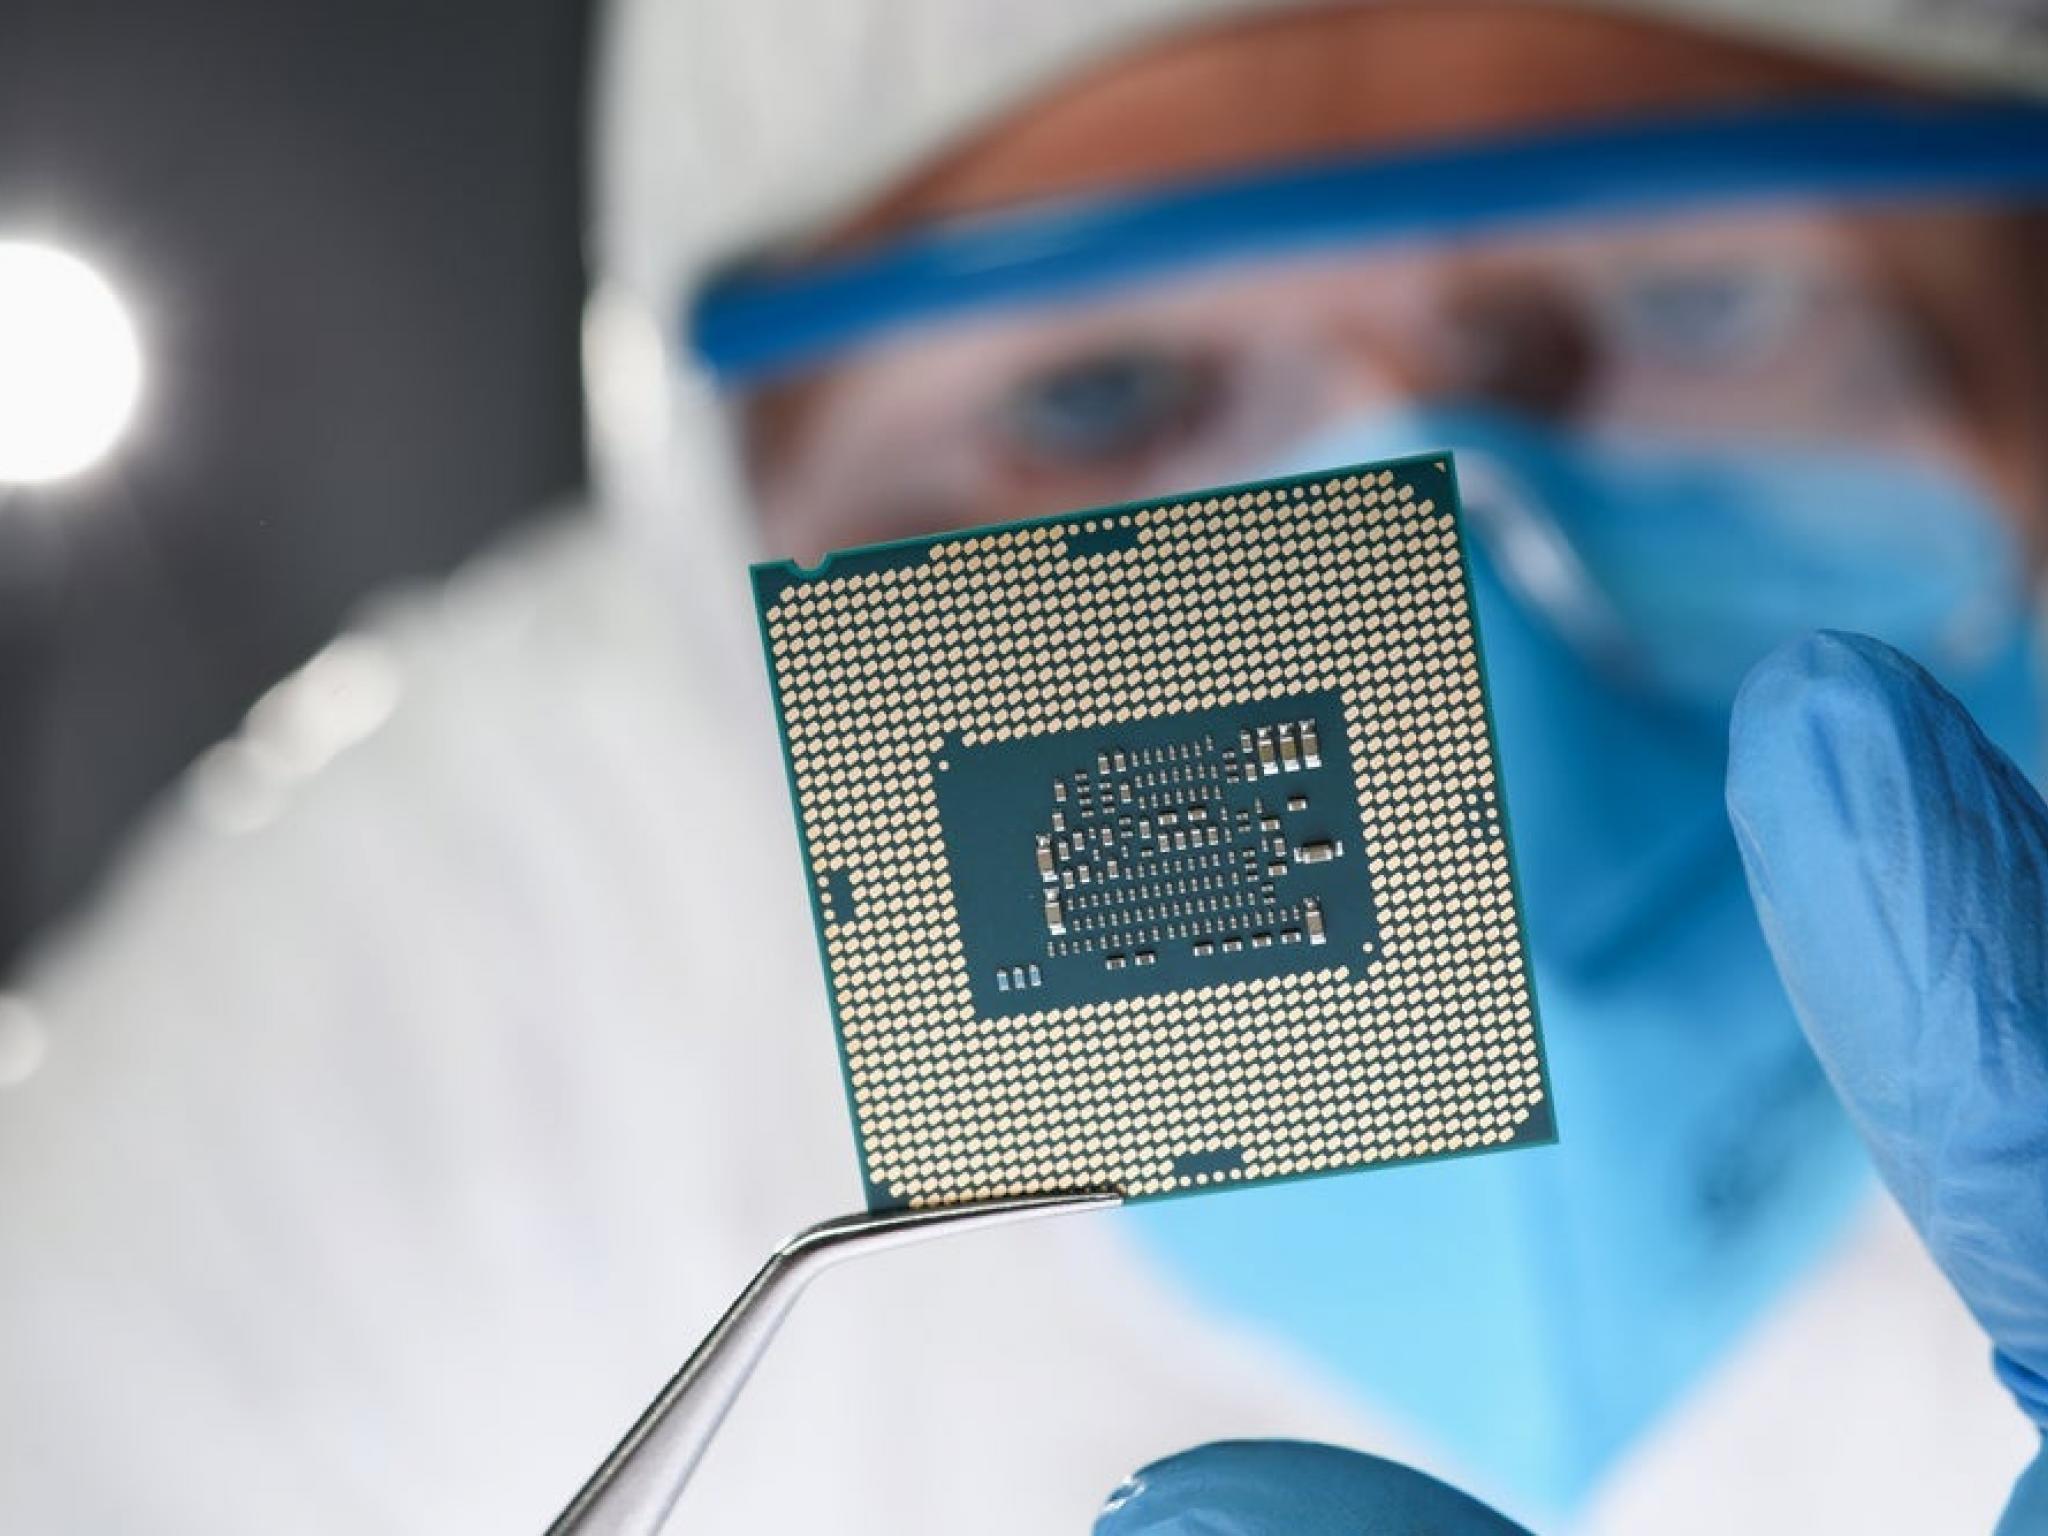  tsmc-cautions-red-hot-chip-industry-growth-could-cool-amid-declining-automotive-chip-demand 